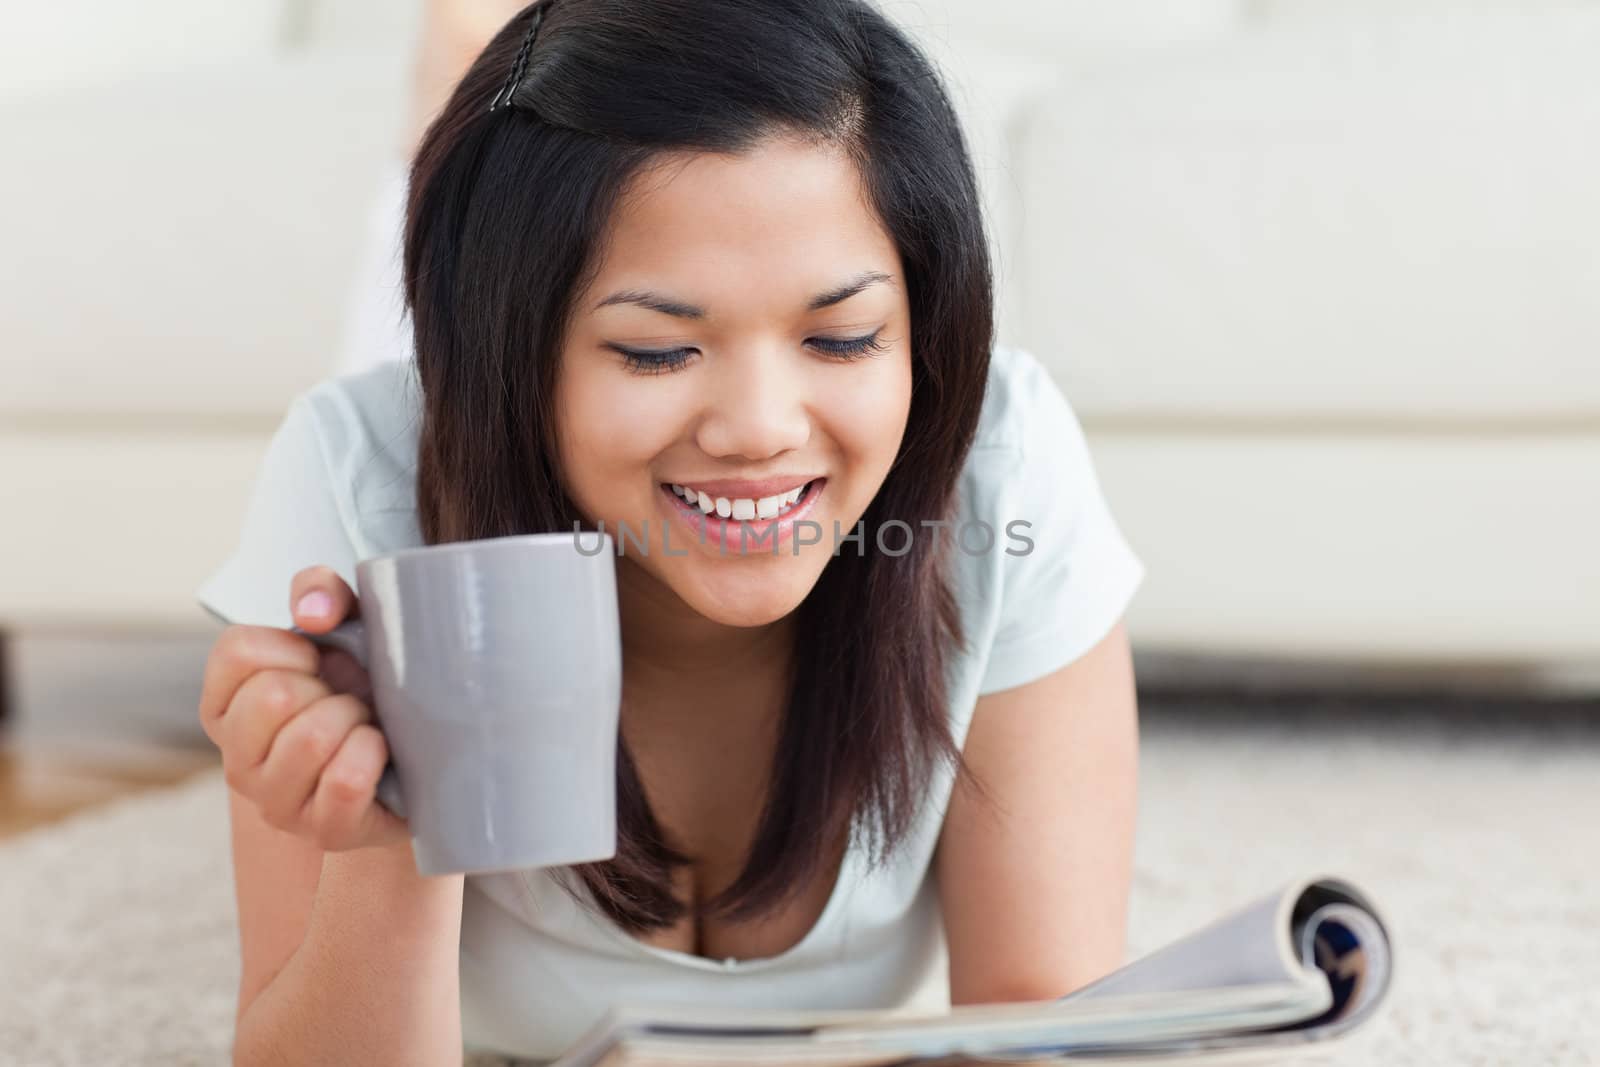 Smiling woman holding a cup and a magazine in a living room